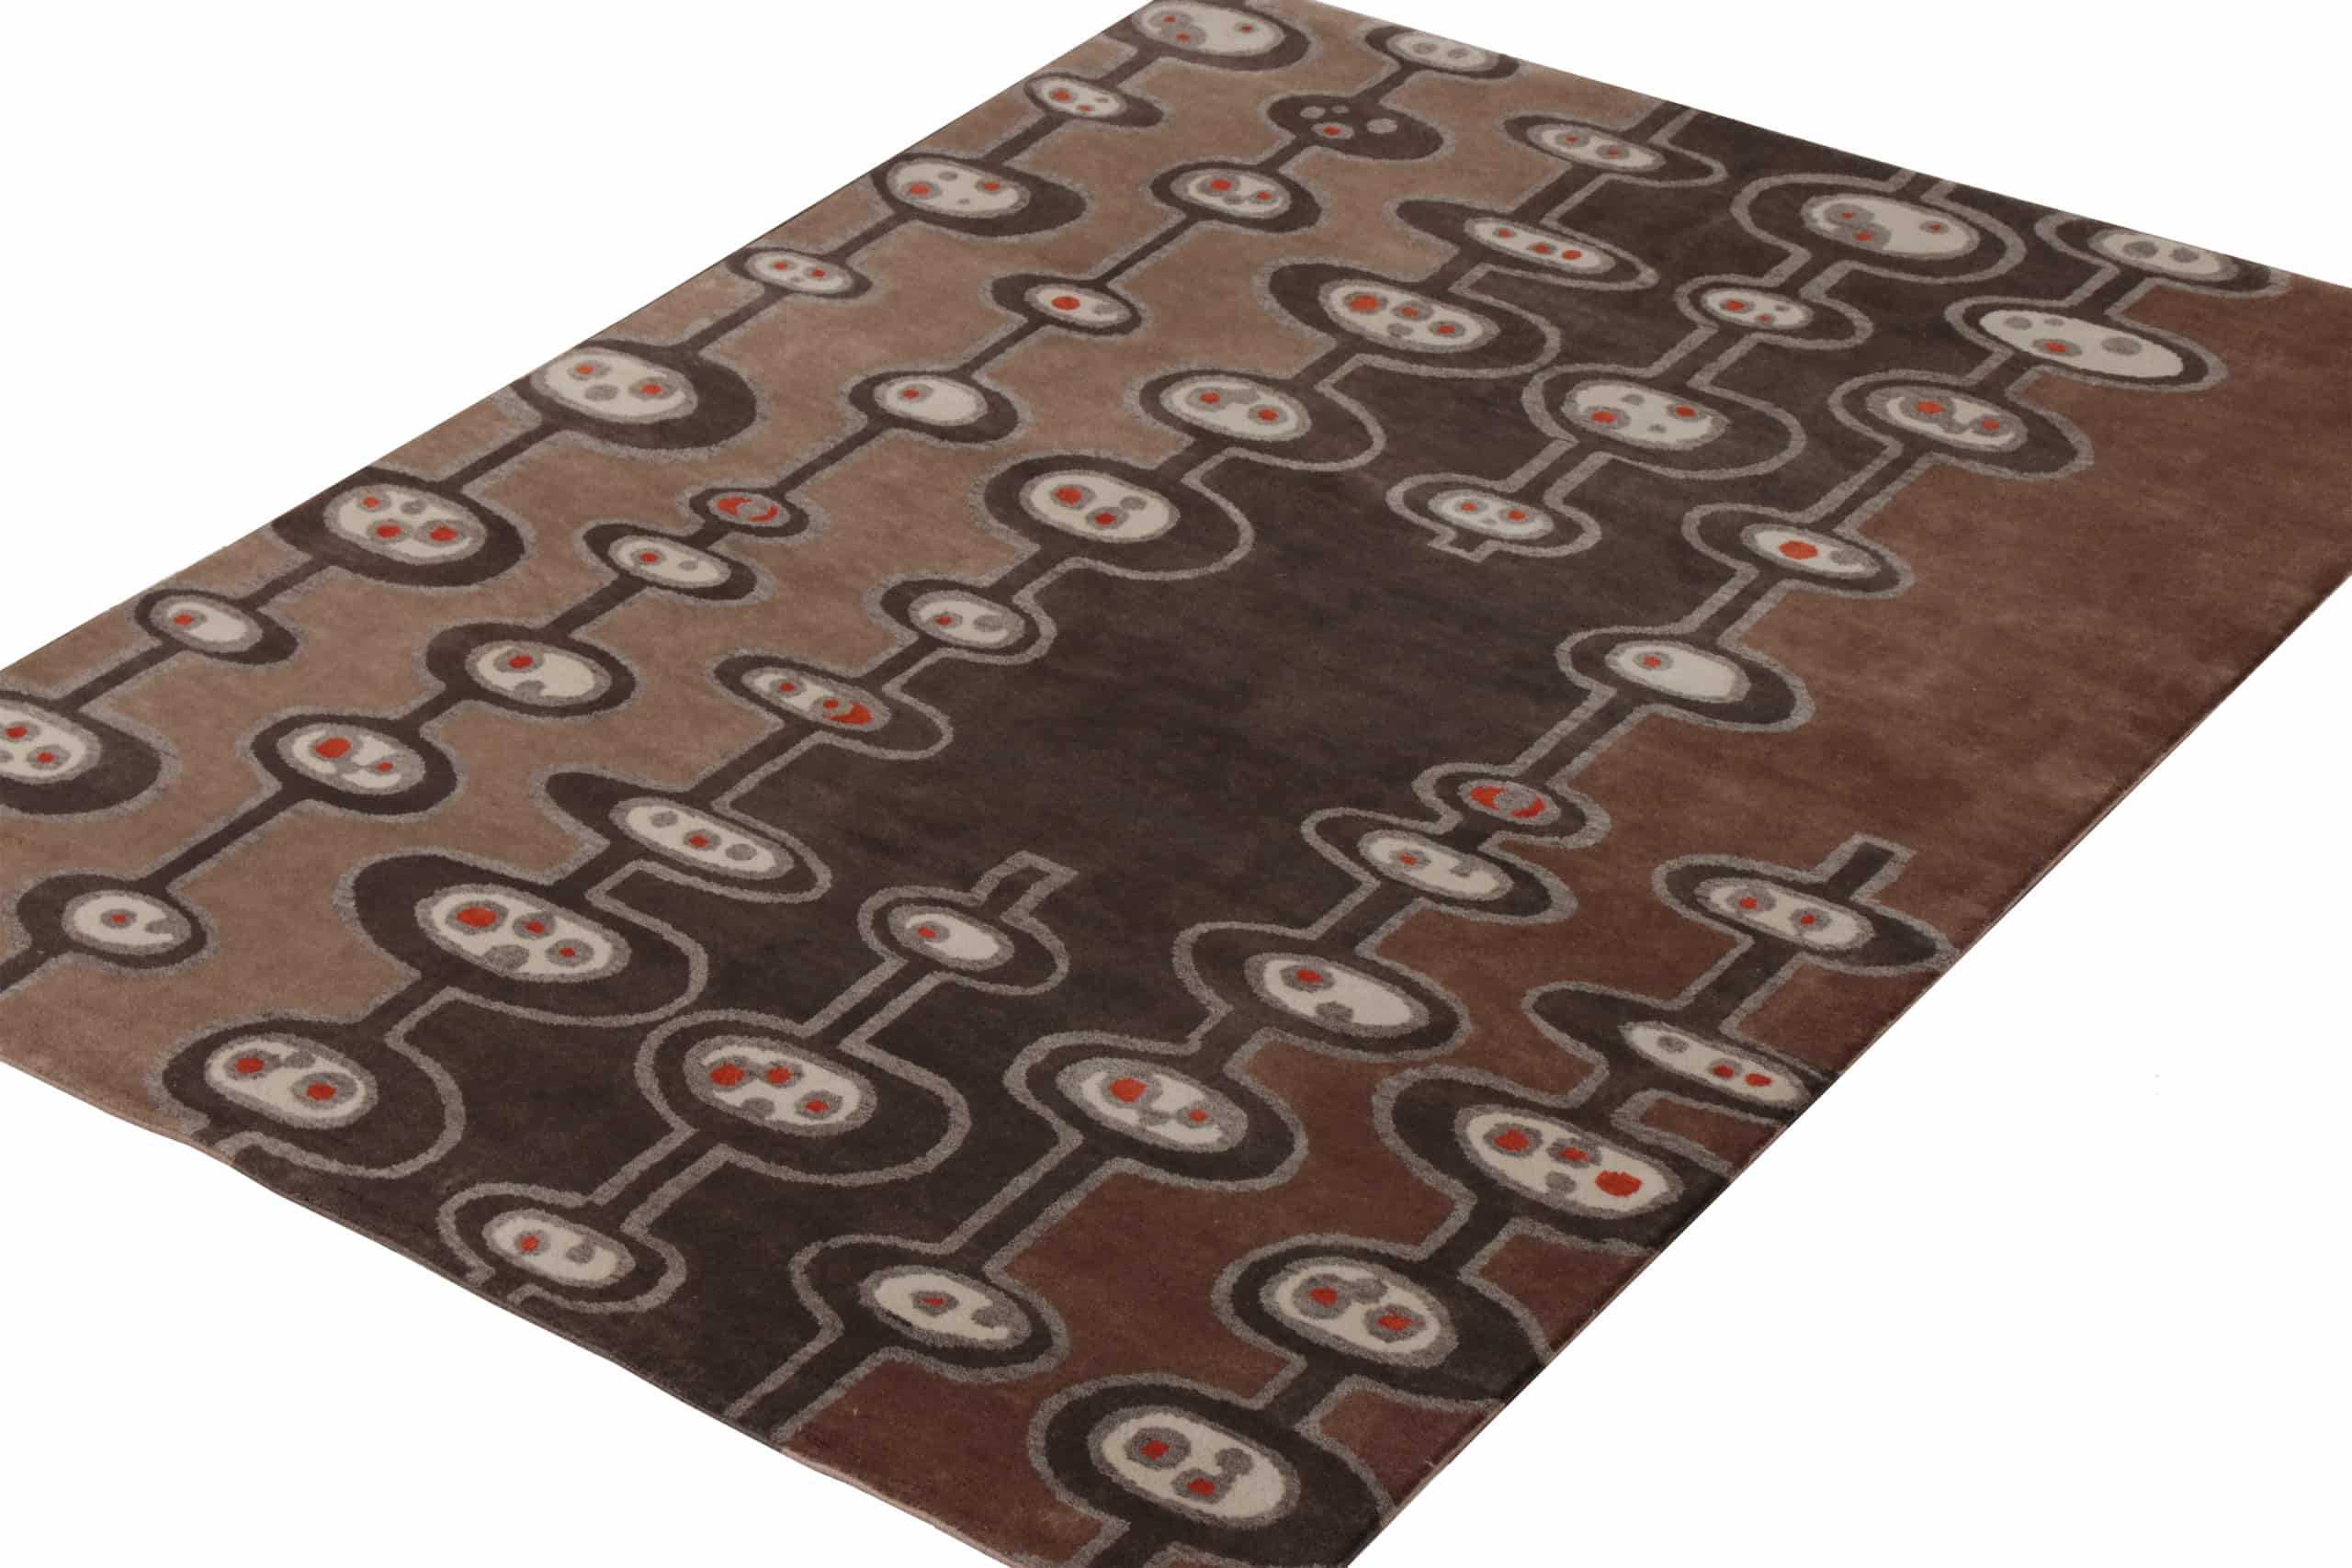 Whole View Of Dark Brown Mid Century Modern Rug 60754 by Nazmiyal Antique Rugs